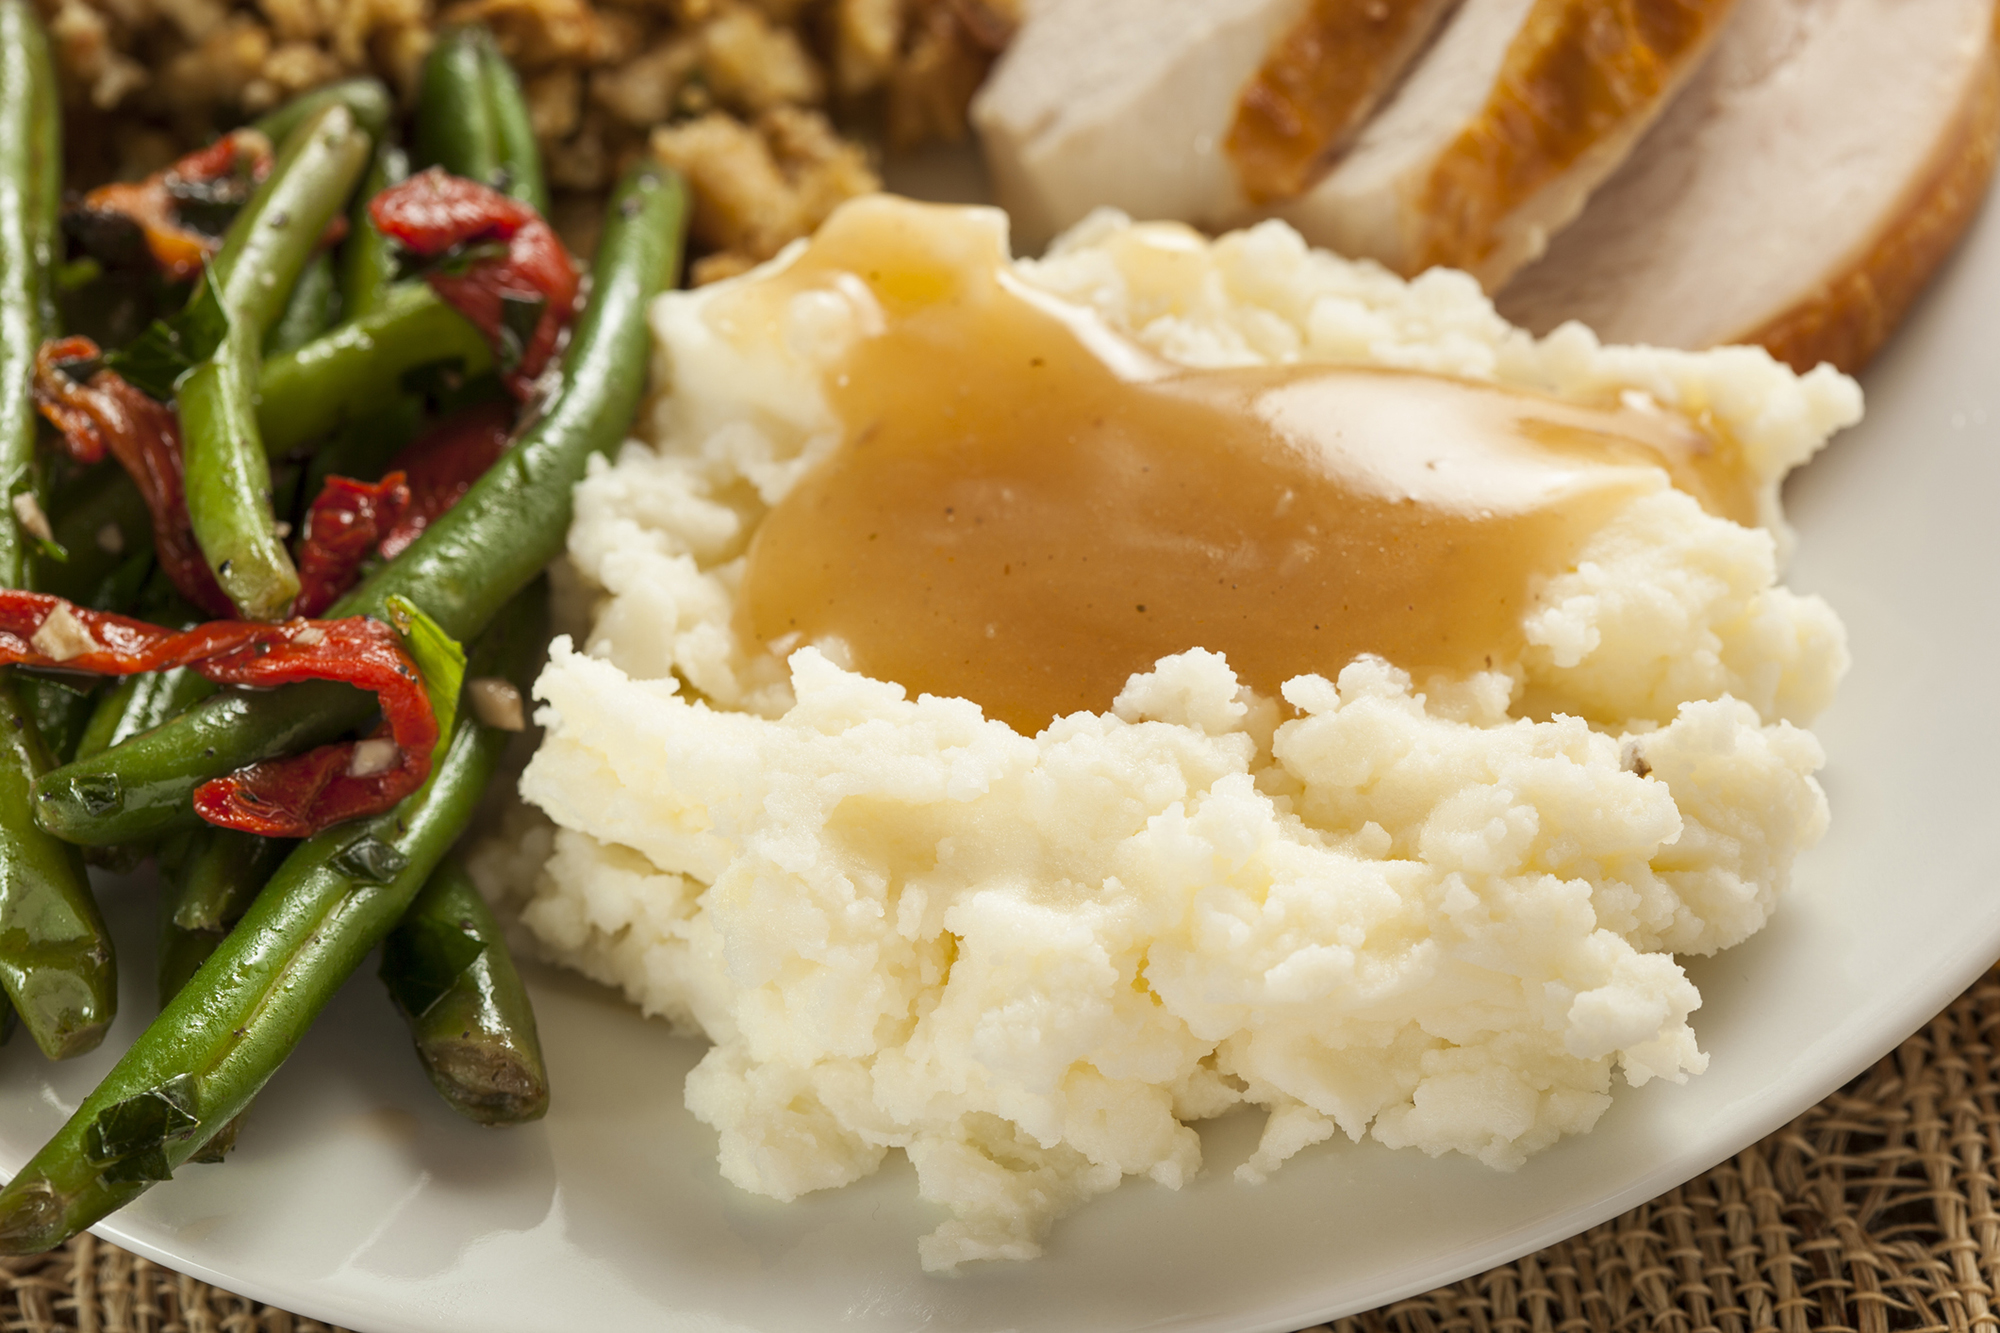 Mashed potatoes with gravy for Thanksgiving. (bhofack2/Getty Images)